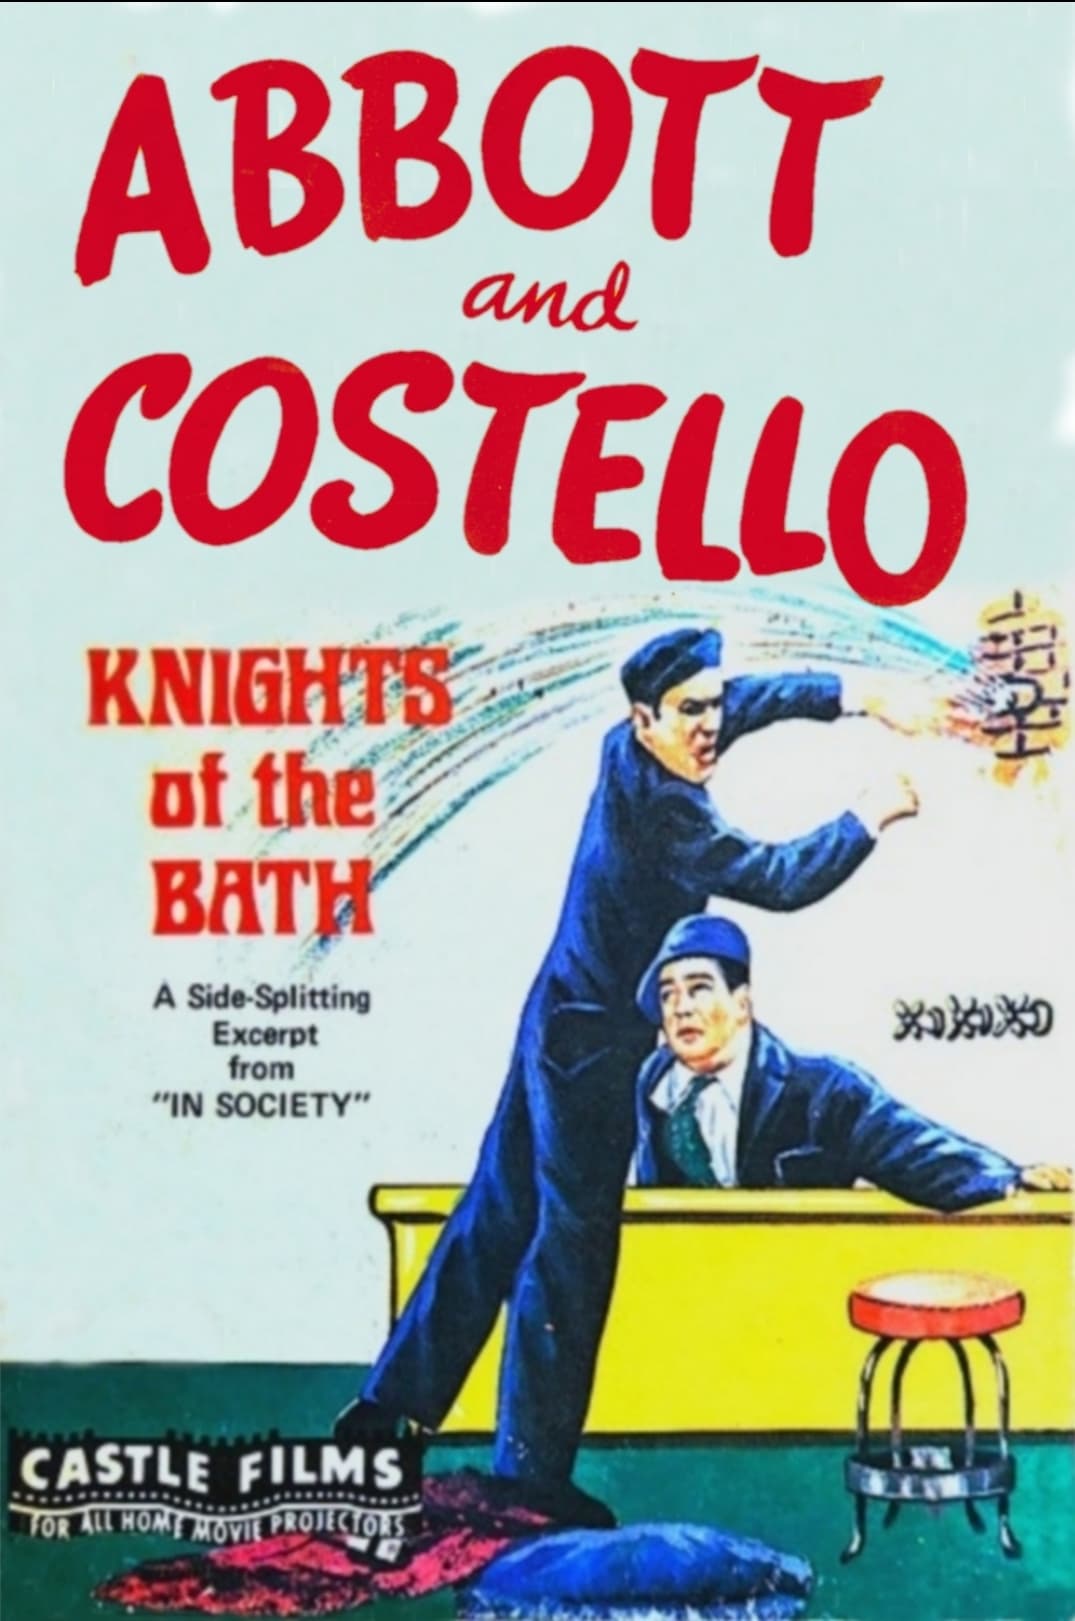 Knights of the Bath